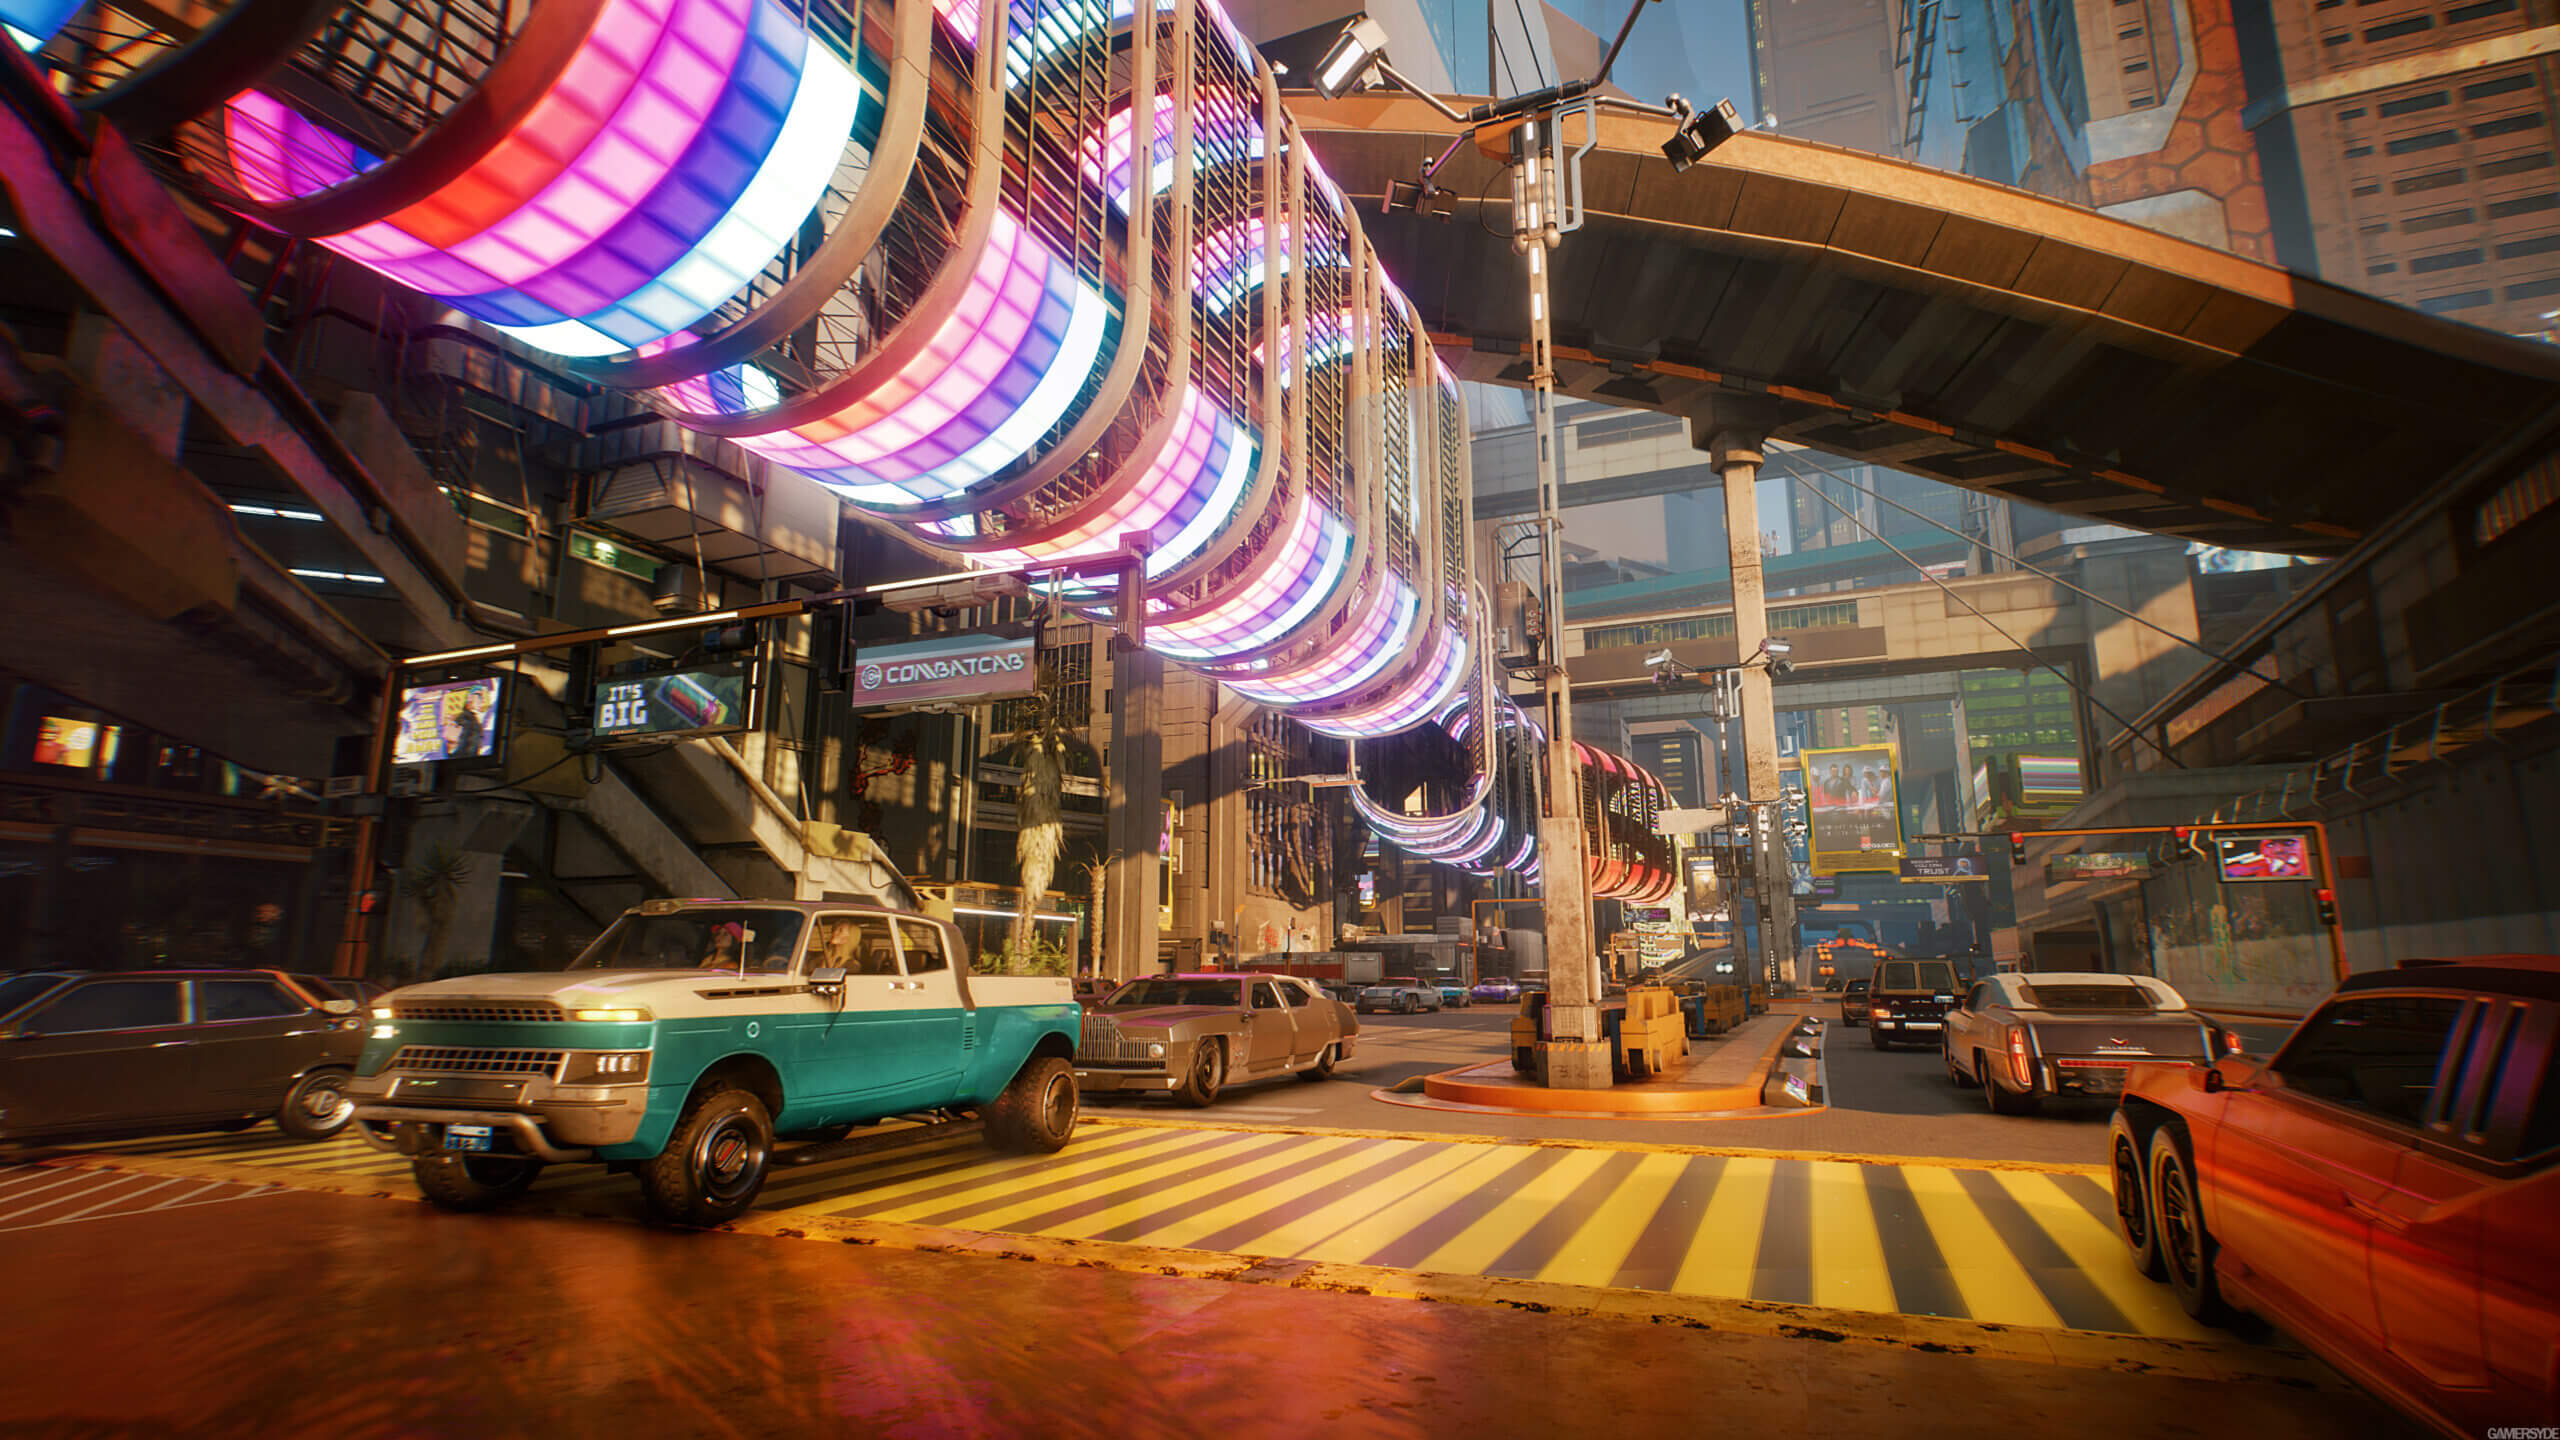 NVIDIA has released a fix for the "GeForce 522.25 driver map glitches" in Cyberpunk 2077